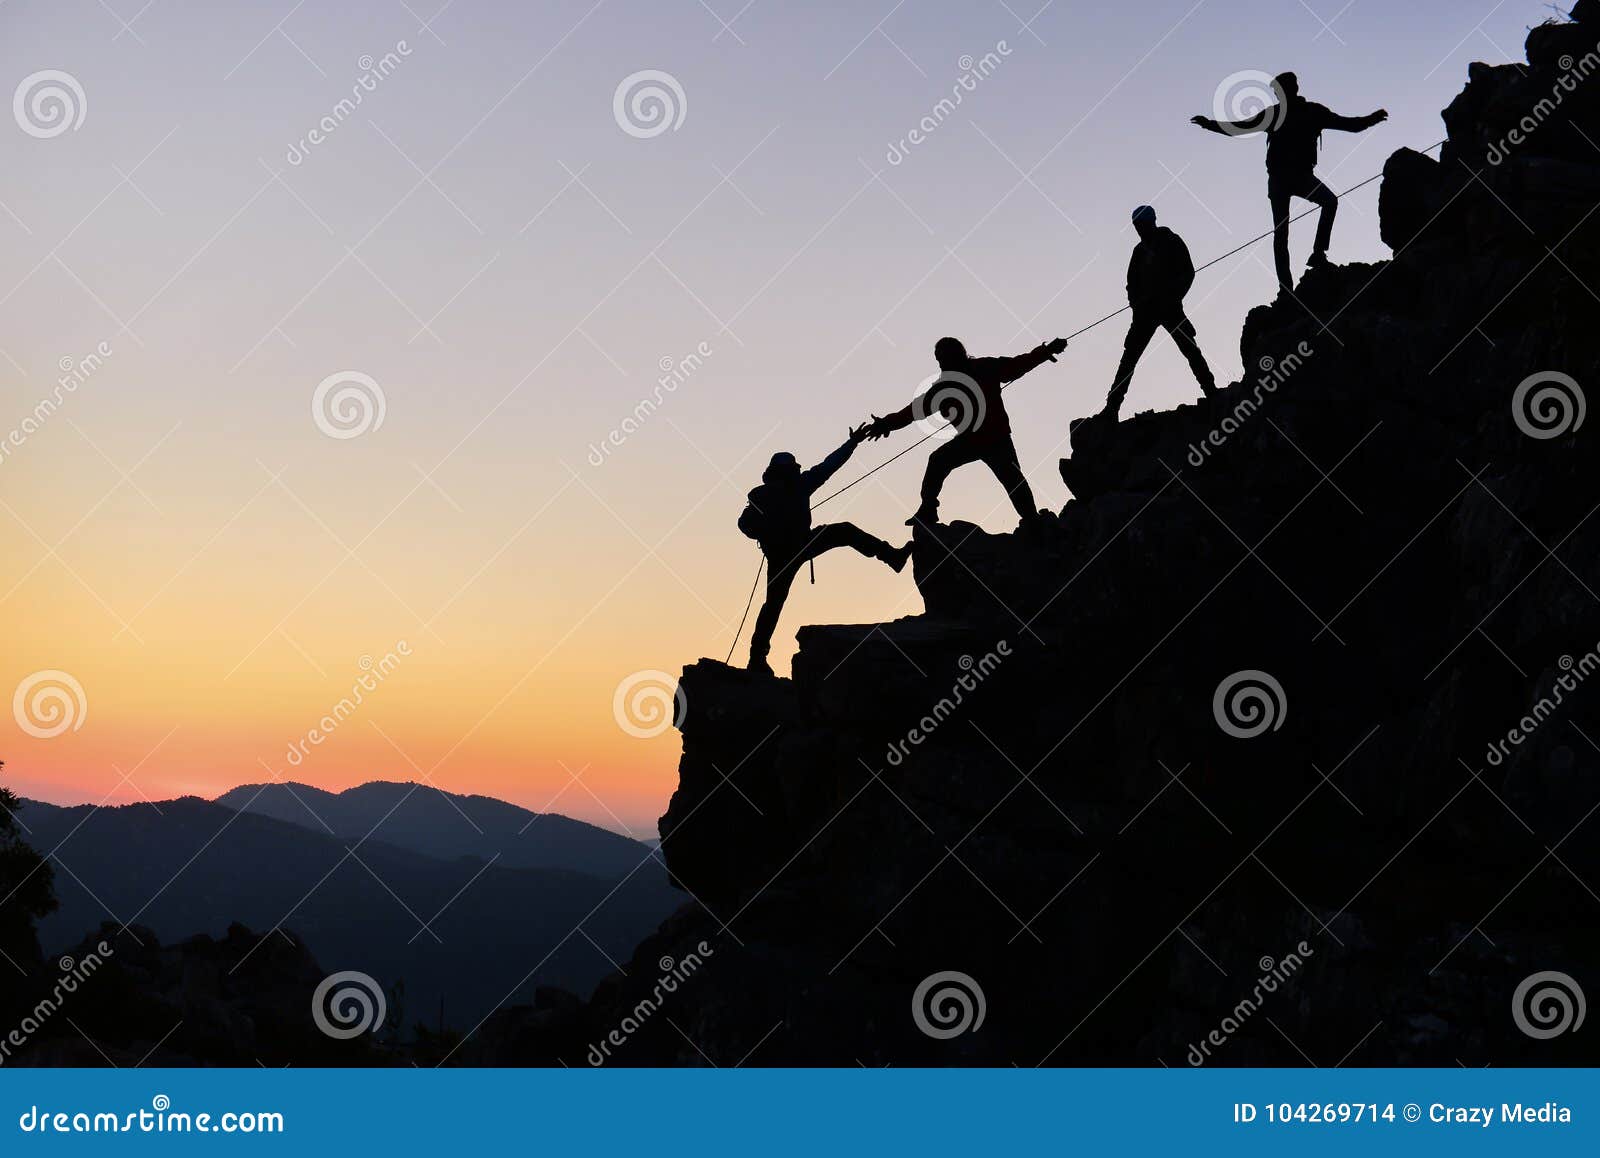 climbers working together